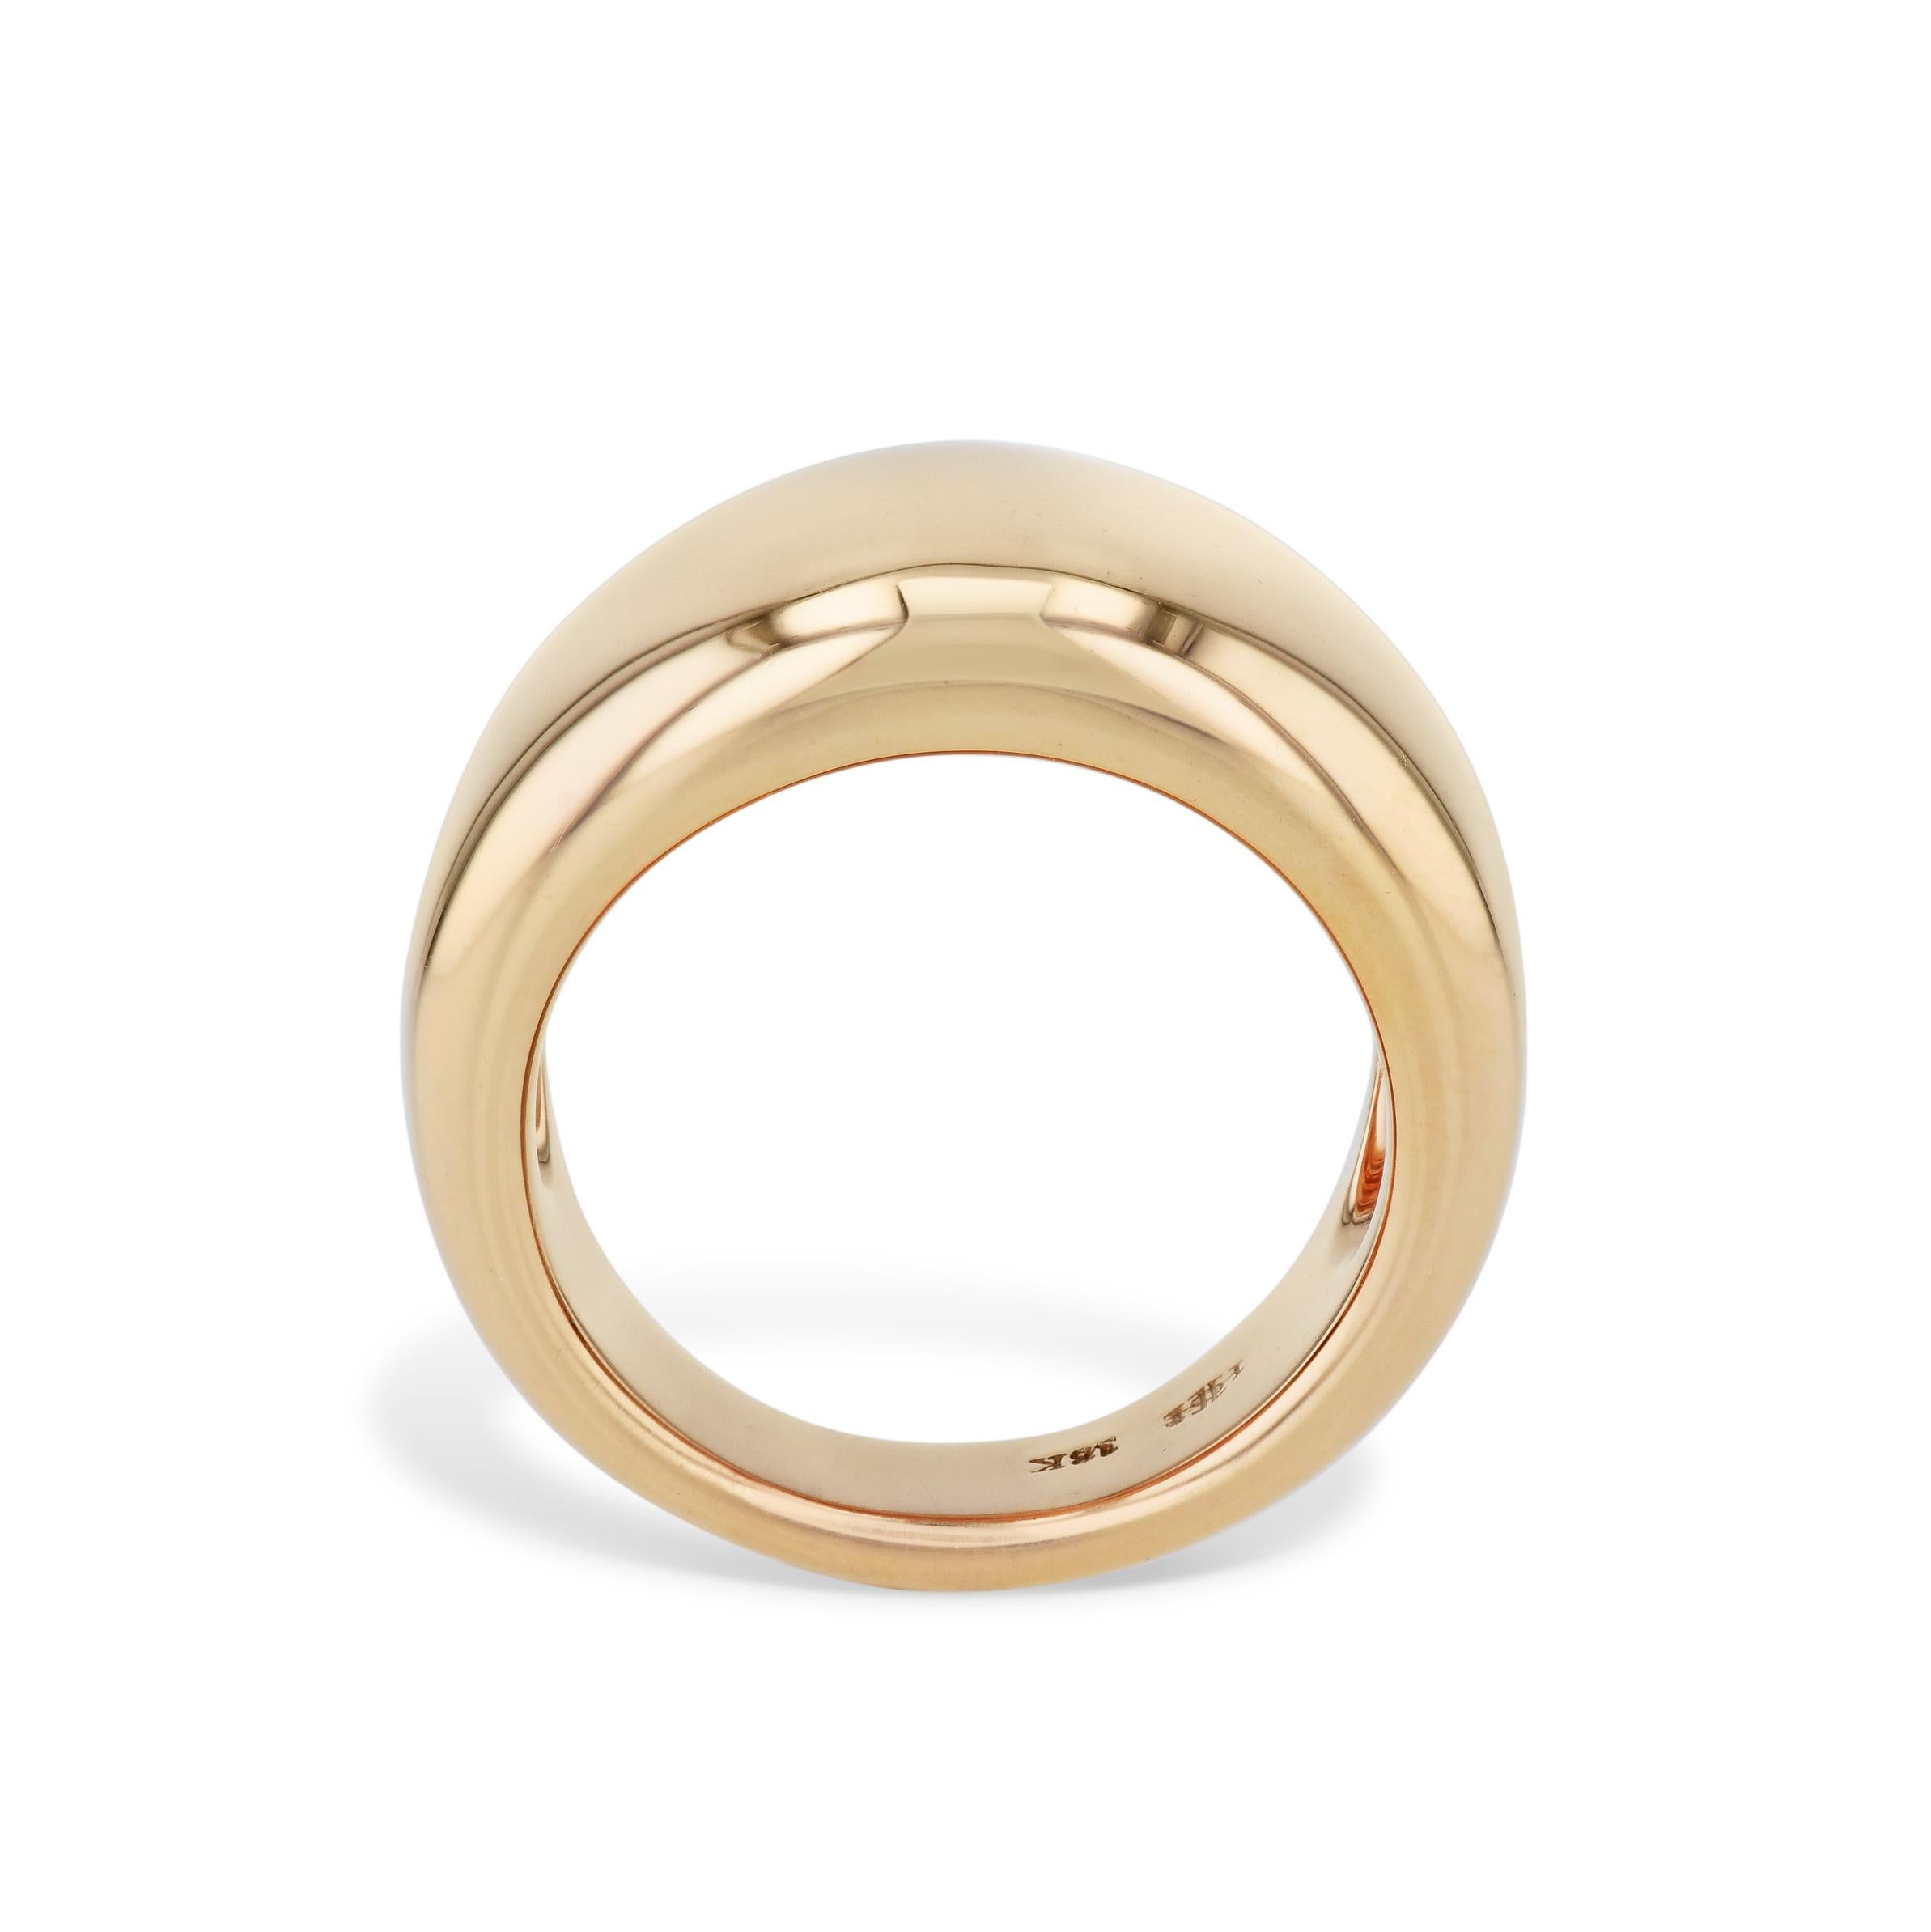 This 18kt Rose Gold Dome Ring is a gorgeous must-have item that'll elevate your look to new heights! Its lustrous rose gold hue adds a pop of color while the dome design adds a touch of classic refinement.

18kt Rose Gold Dome Ring.
Handmade and one